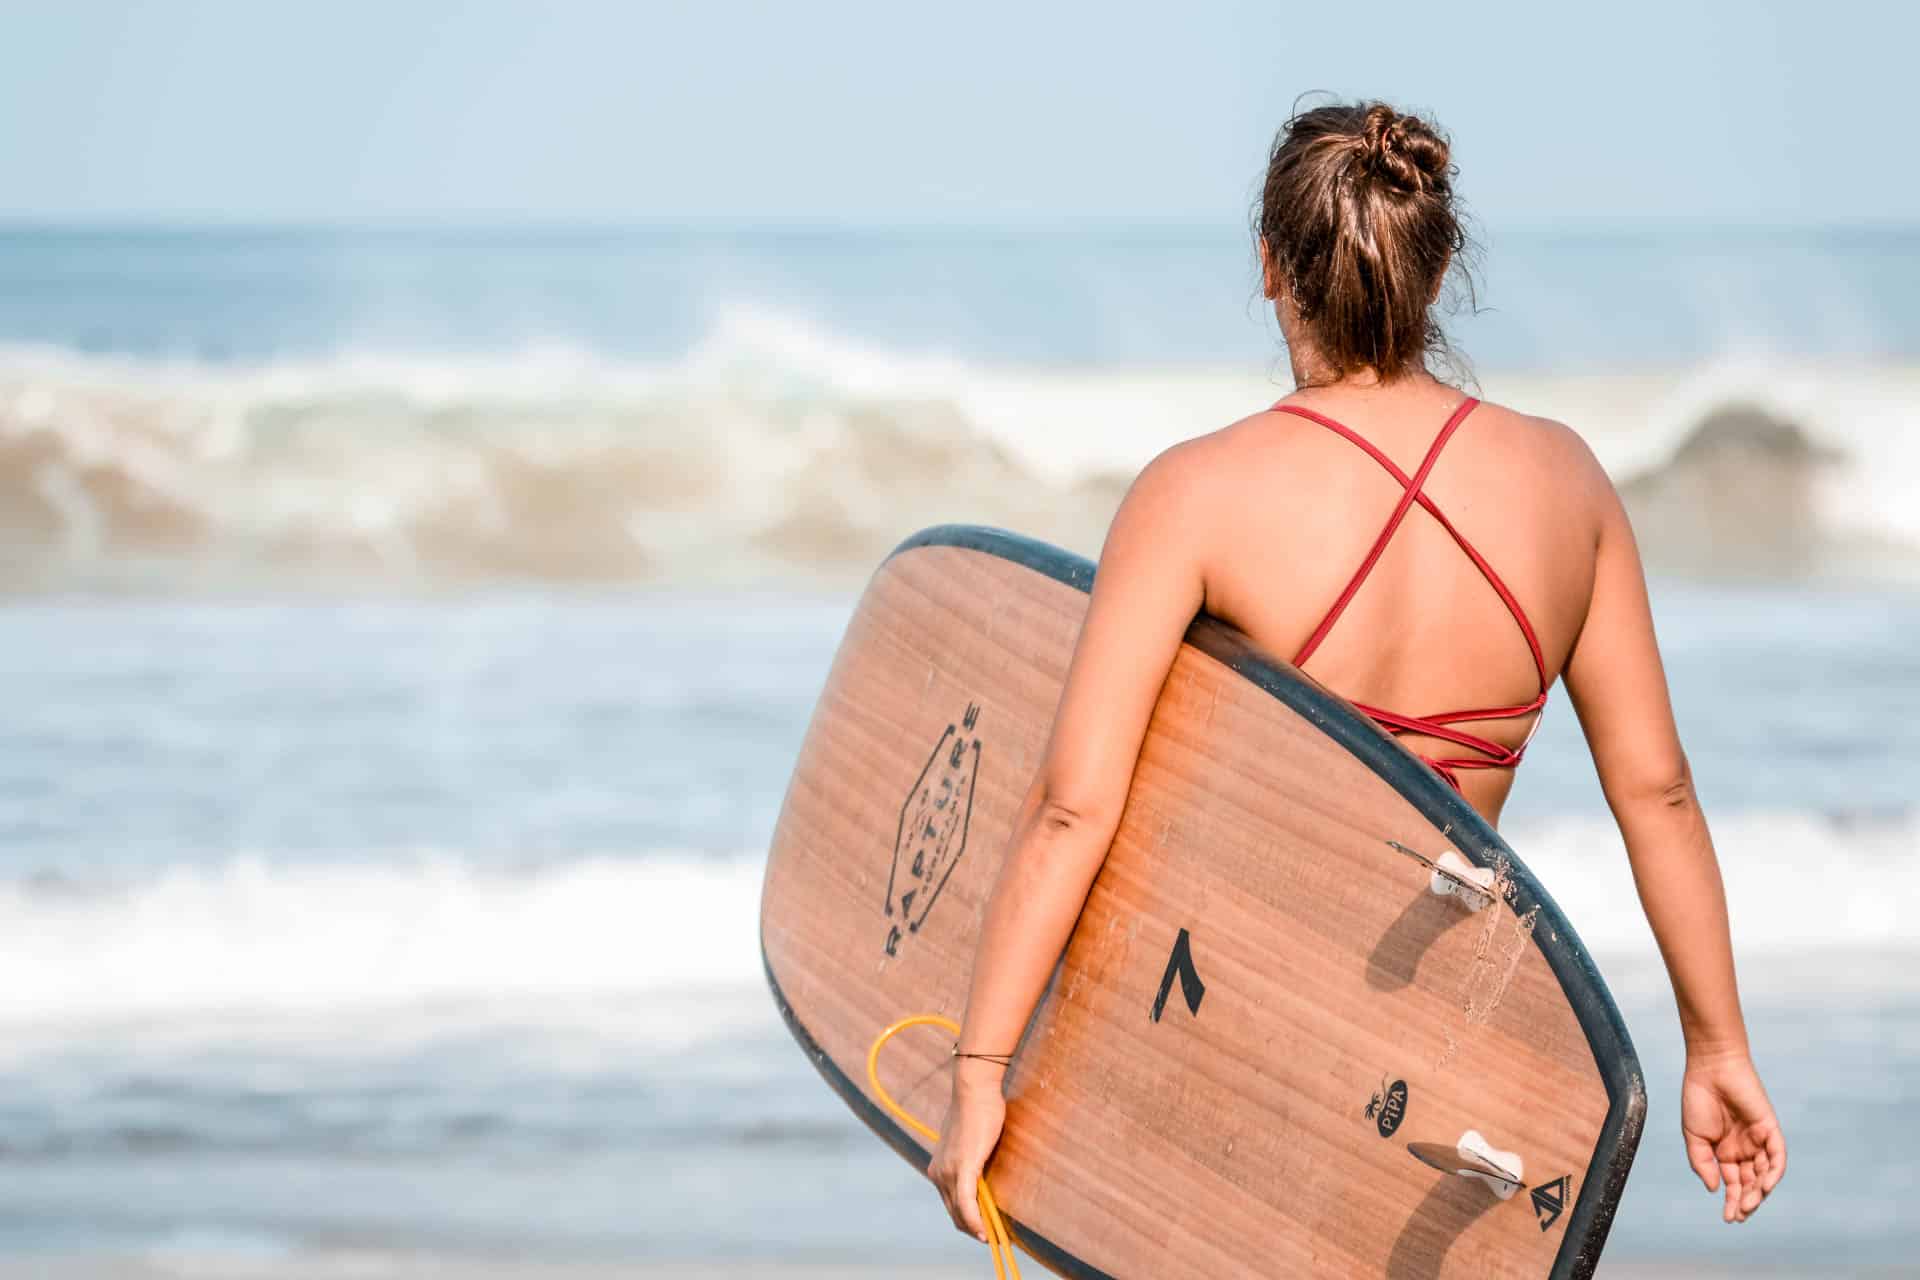 Jargon Watch: Surfer Slang And The Language Of The Waves